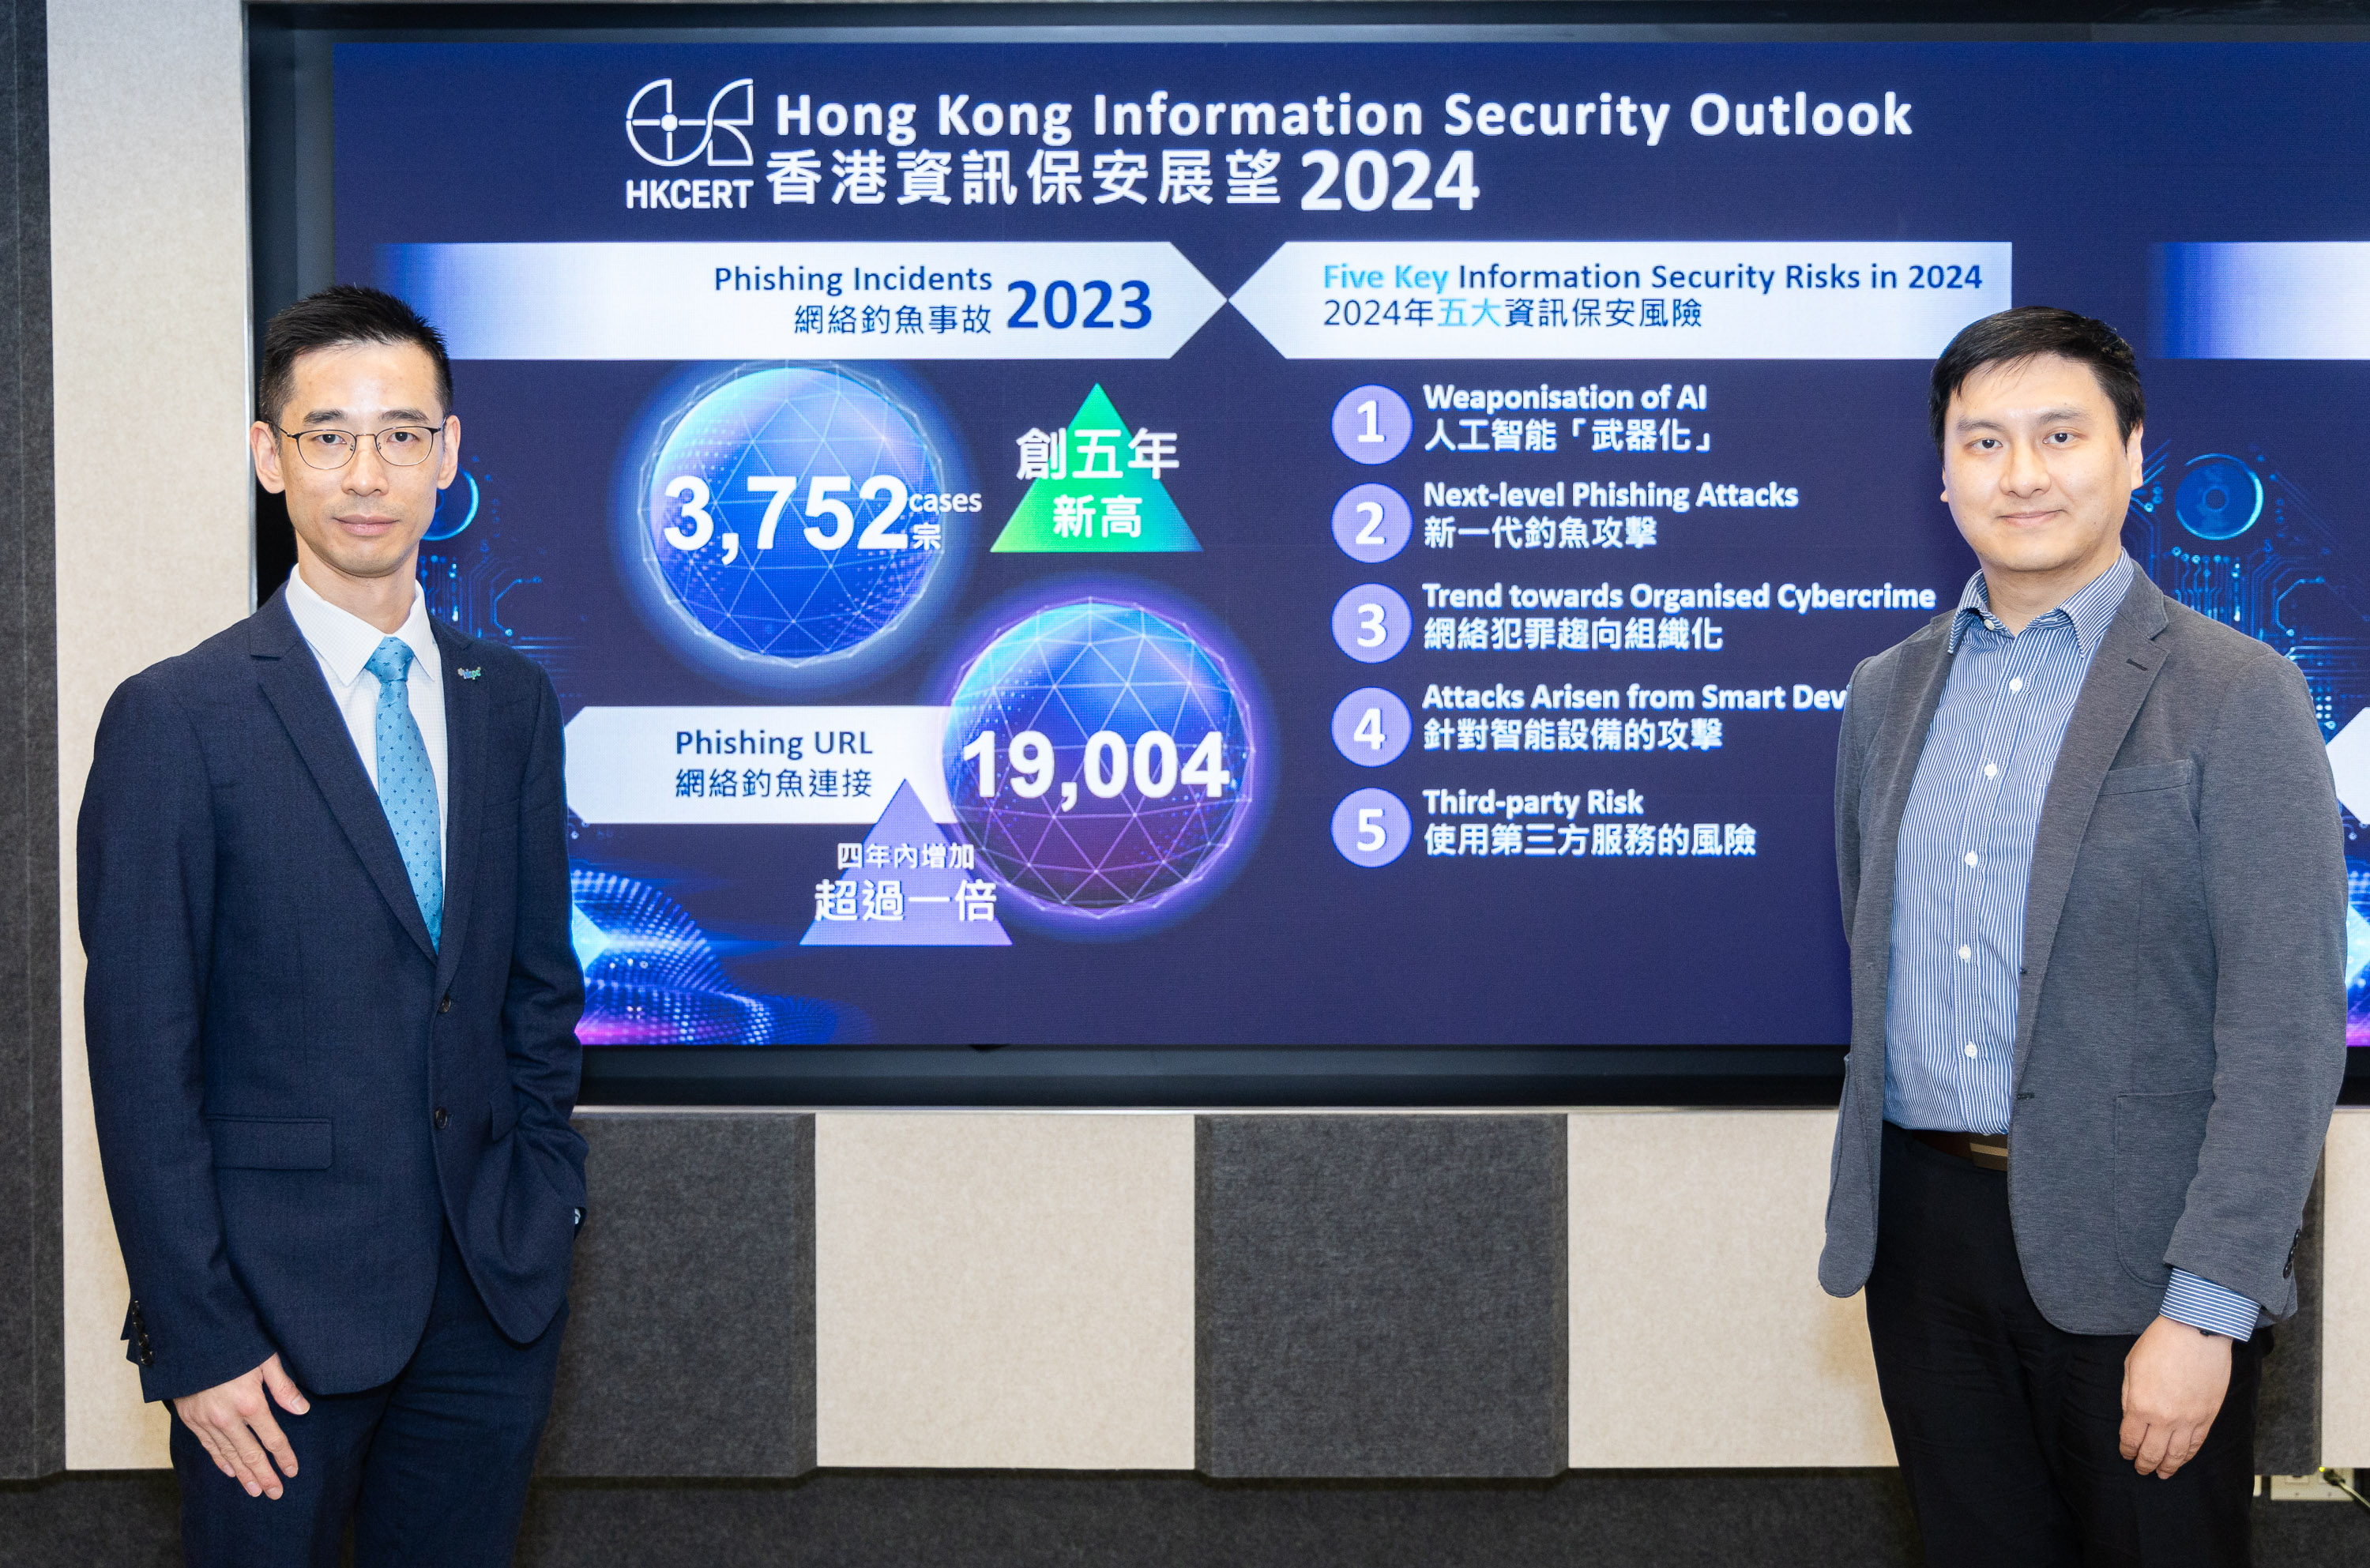 1. The Hong Kong Computer Emergency Response Team Coordination Centre (HKCERT) held a briefing today where Mr Alex CHAN, General Manager, Digital Transformation of HKPC, and spokesman of HKCERT (left), summarised the information security situation in Hong Kong in 2023 and forecasted the five key information security risks in 2024. It also invited Mr Frankie WONG, Vice-Chairperson of Professional Information Security Association, and representative of HKCERT Critical Infrastructure Cyber Security Watch Programme (right), to share the latest security risks of the ransomware.